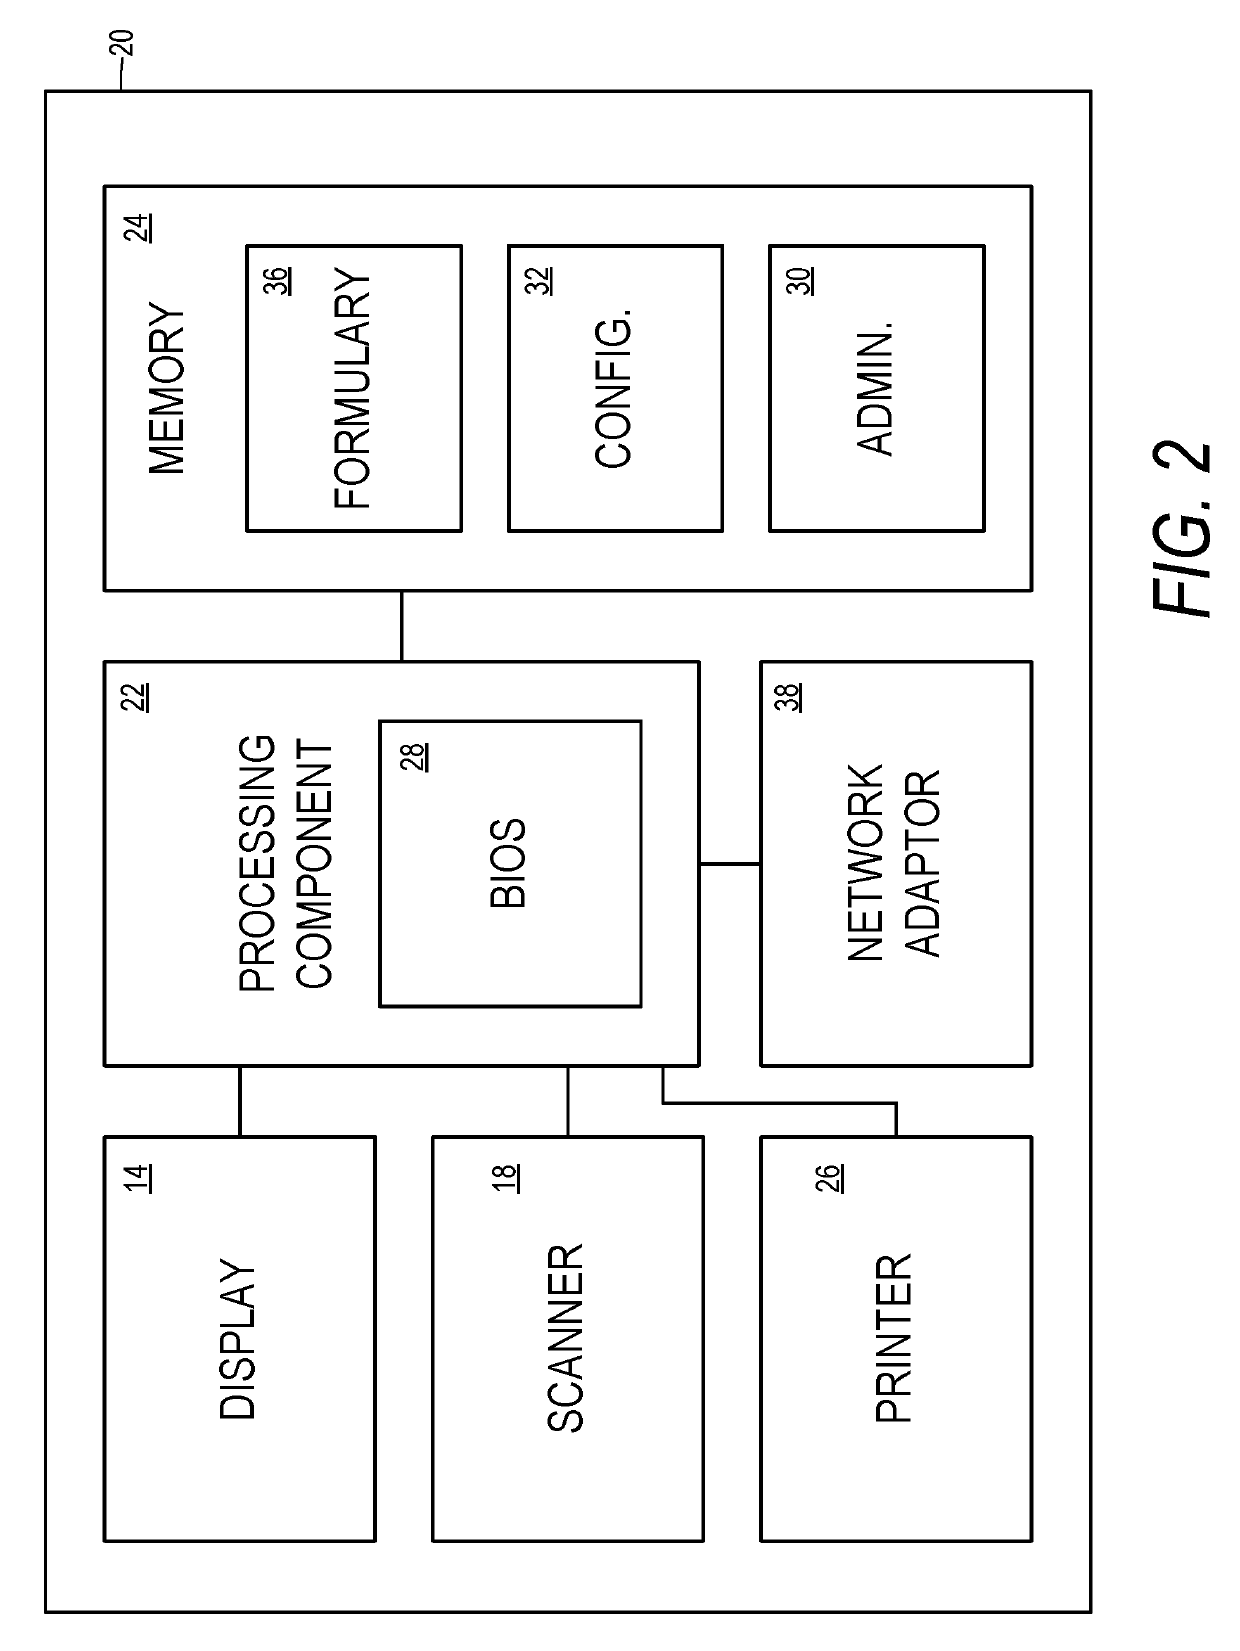 Networkable medical labeling apparatus and method